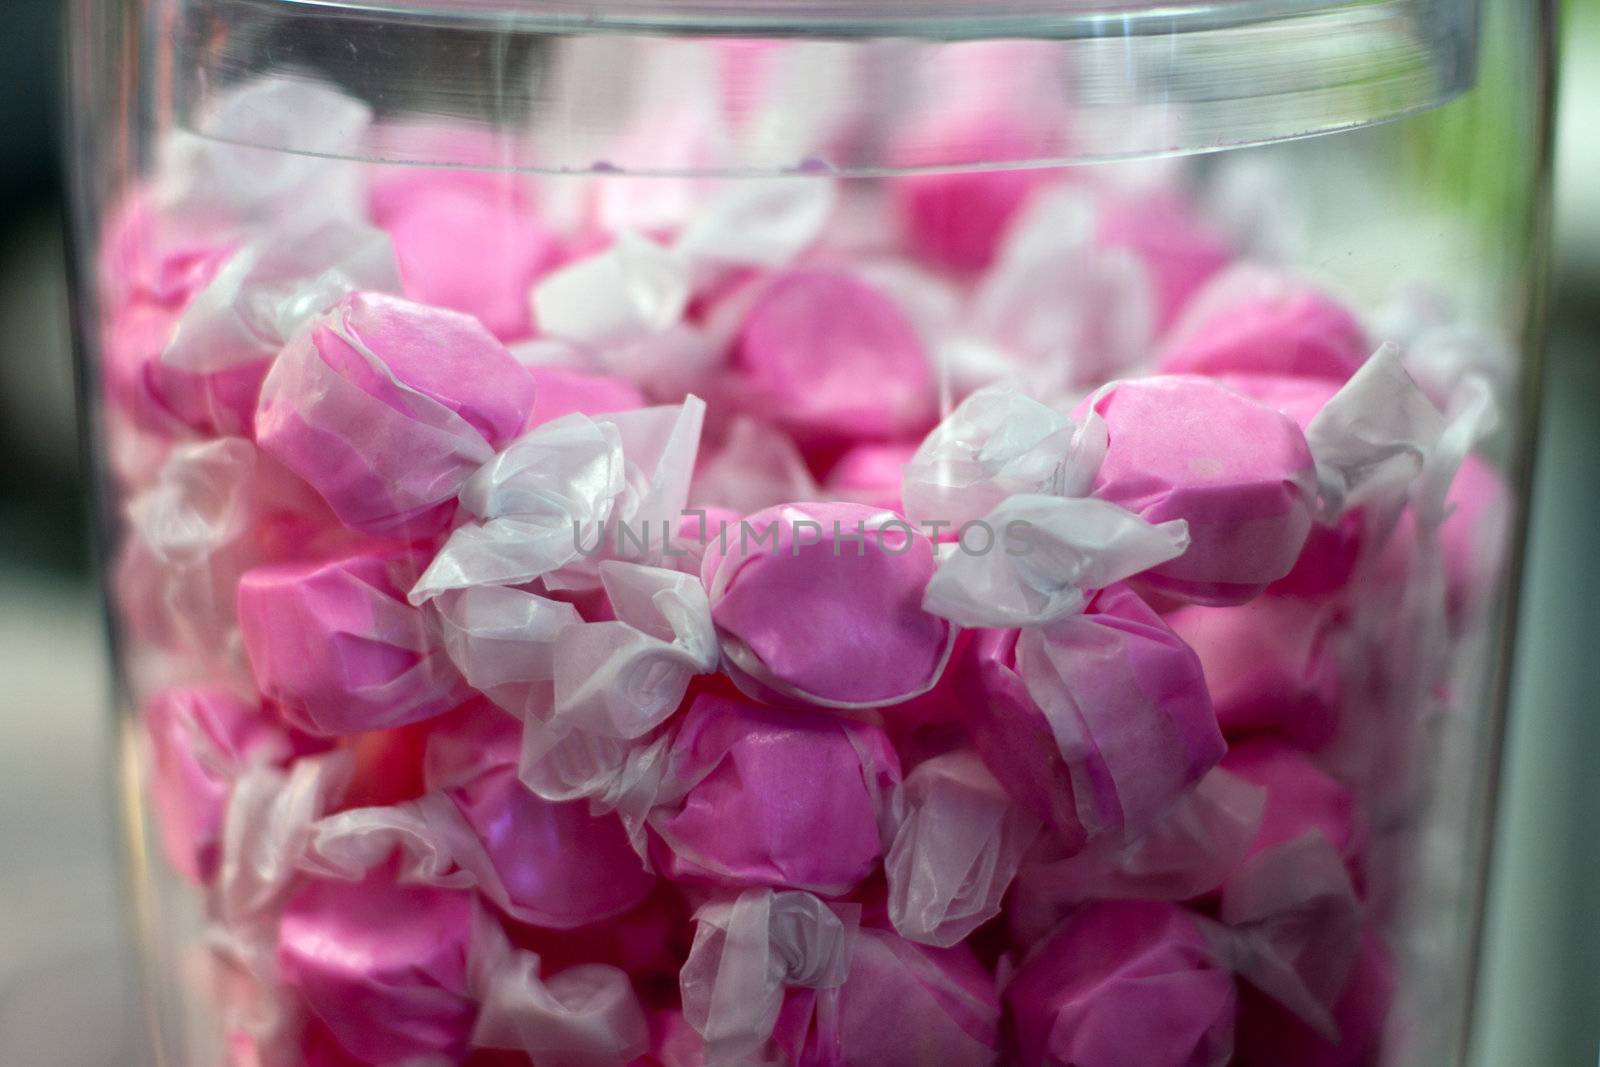 Pink wrapped Saltwater candy in glass container